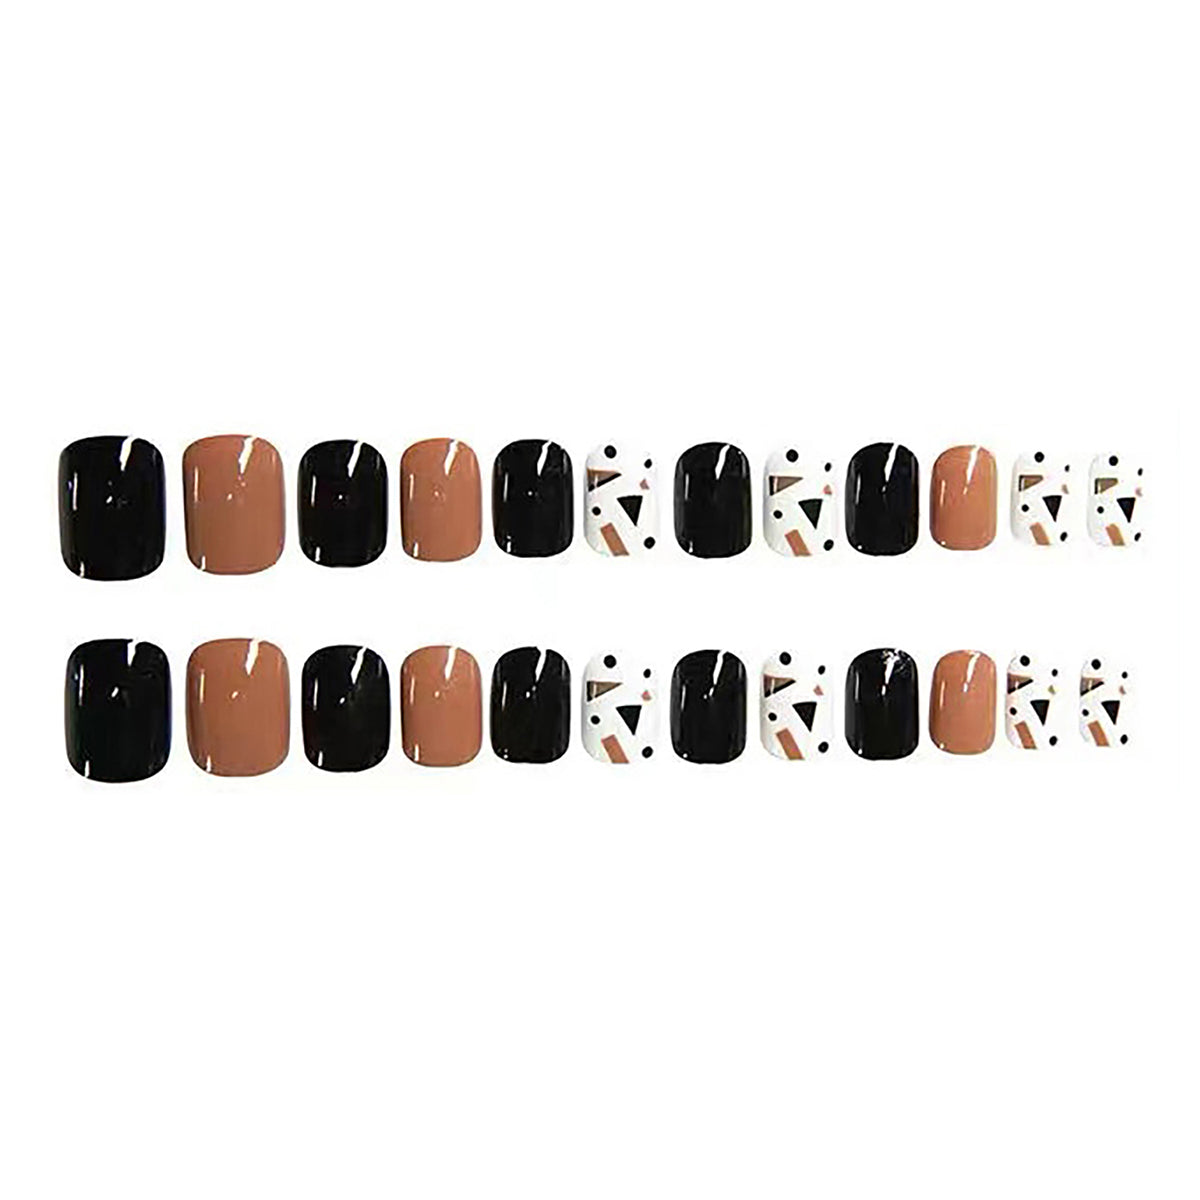 Black & Brown Cow Printed Stick On Nails